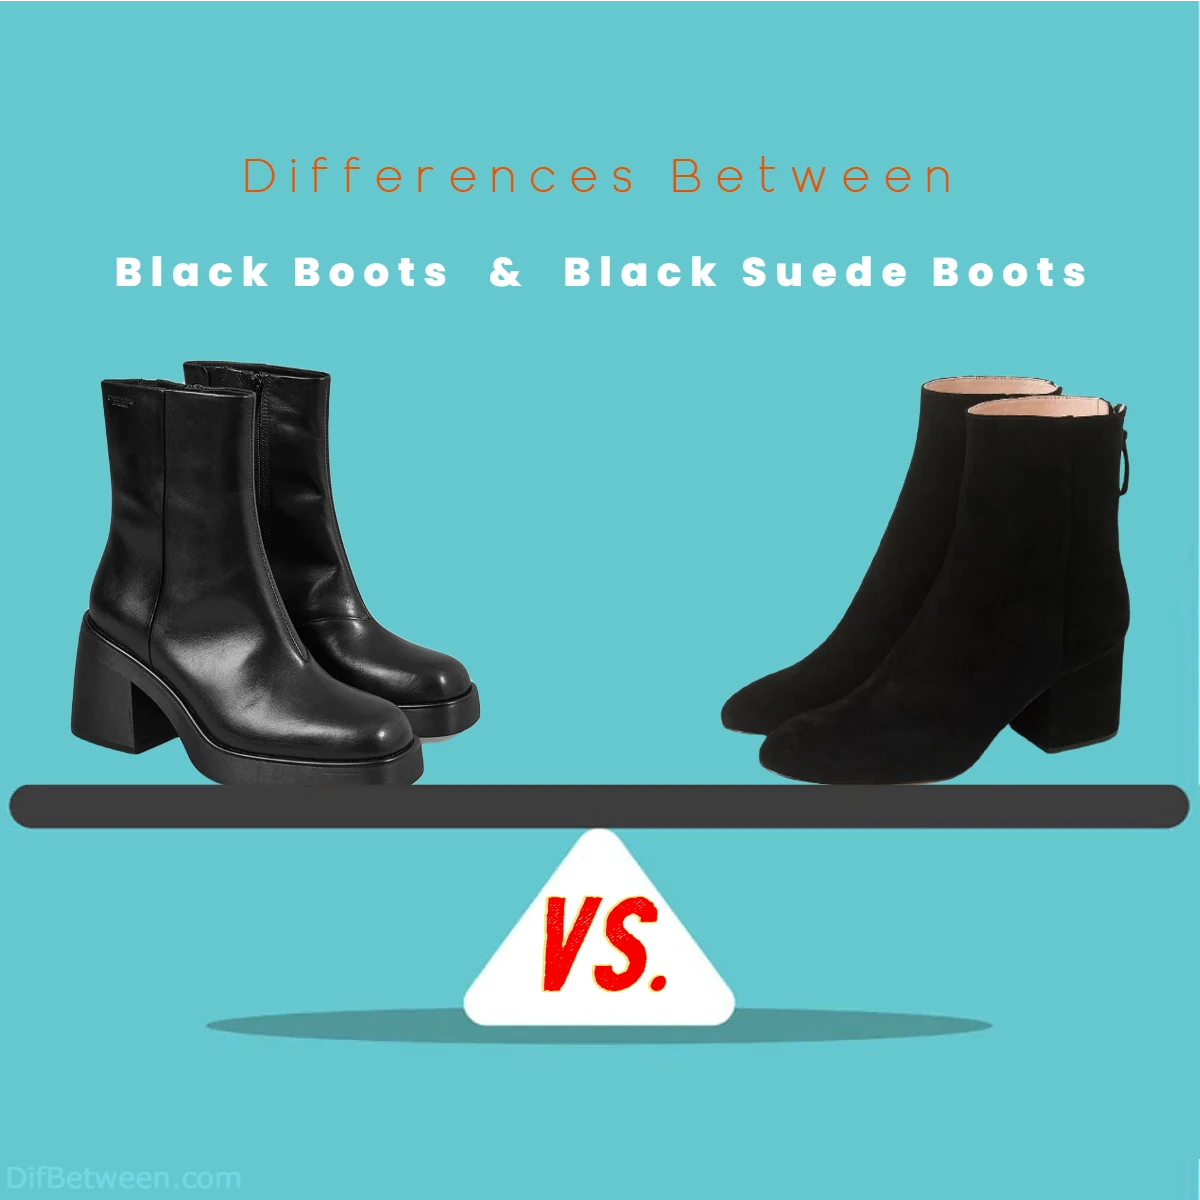 Differences Between Black Boots vs Black Suede Boots